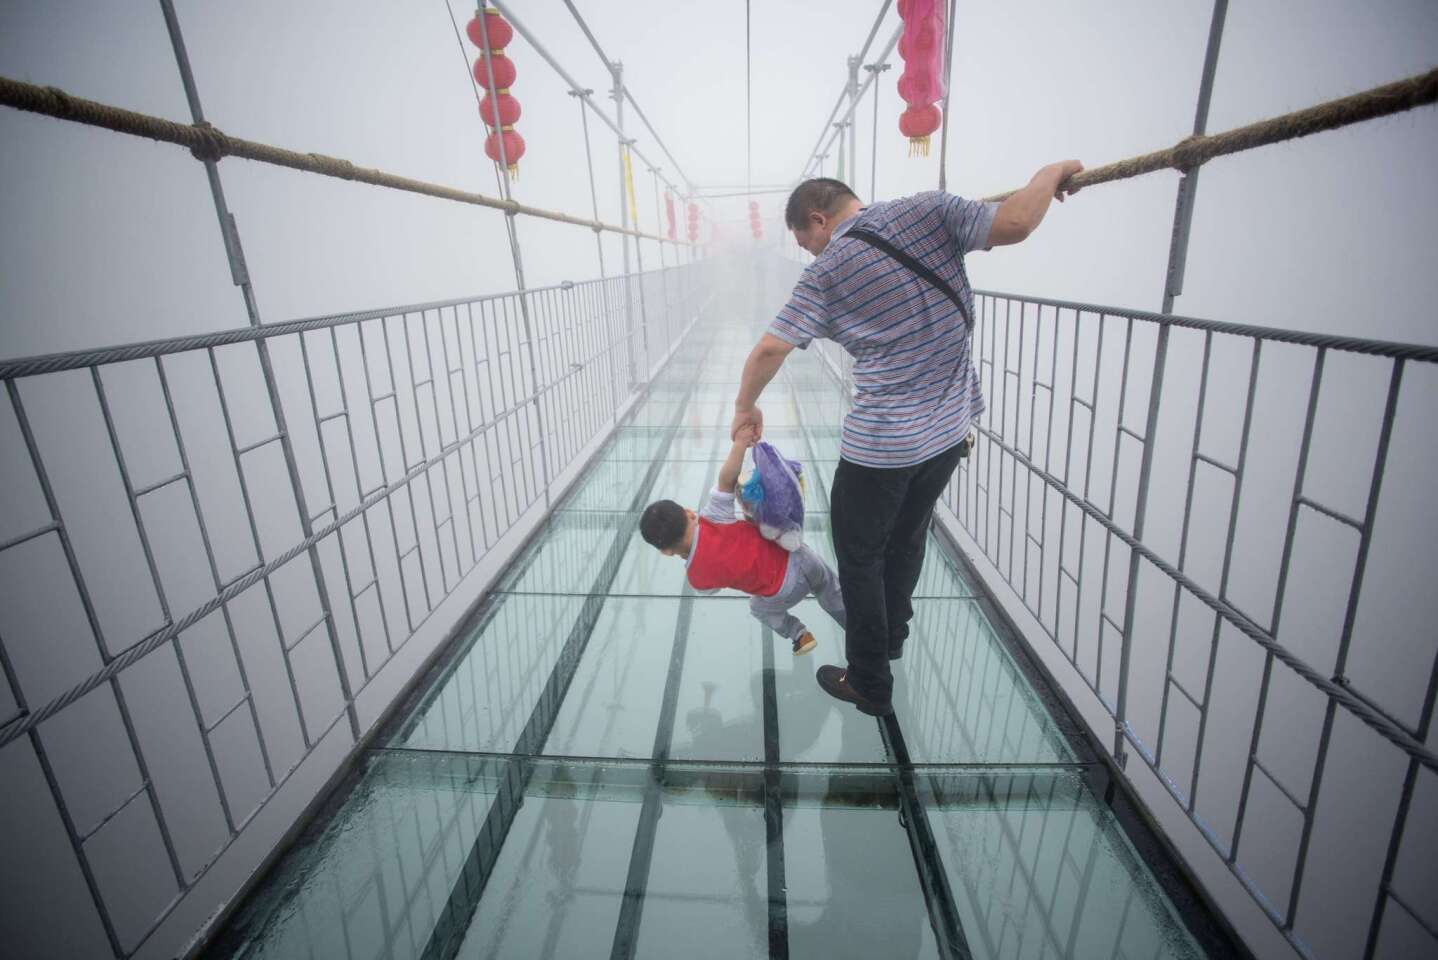 Glass walkway over canyon in China